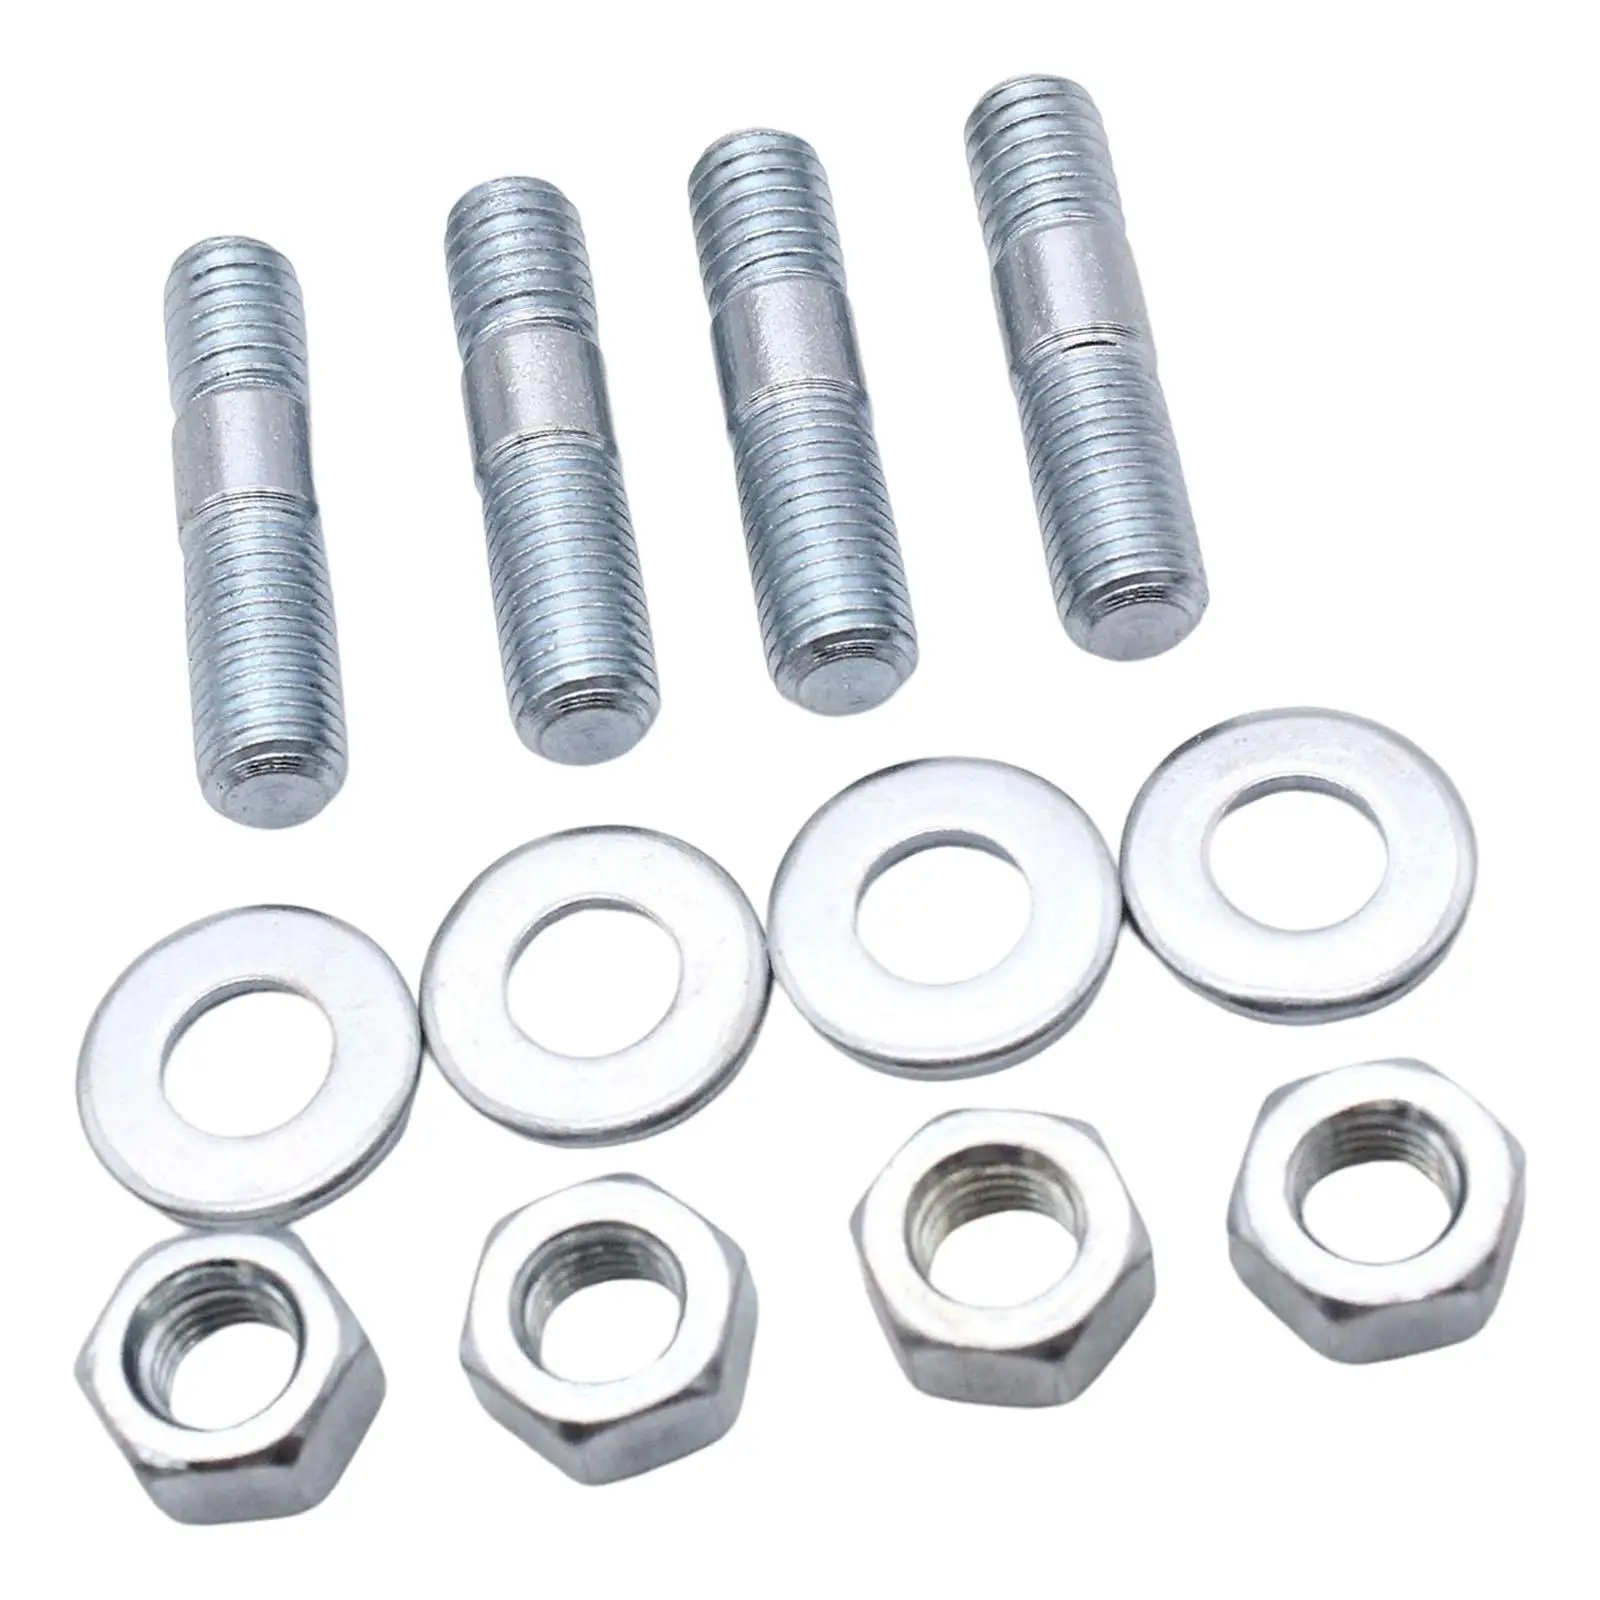 Carburetor Stud Kit 1 3/8 inch Carb Studs Kit Metal Carb Spacer Stud Kit Fit for Vehicle Parts Easy to Install Replace